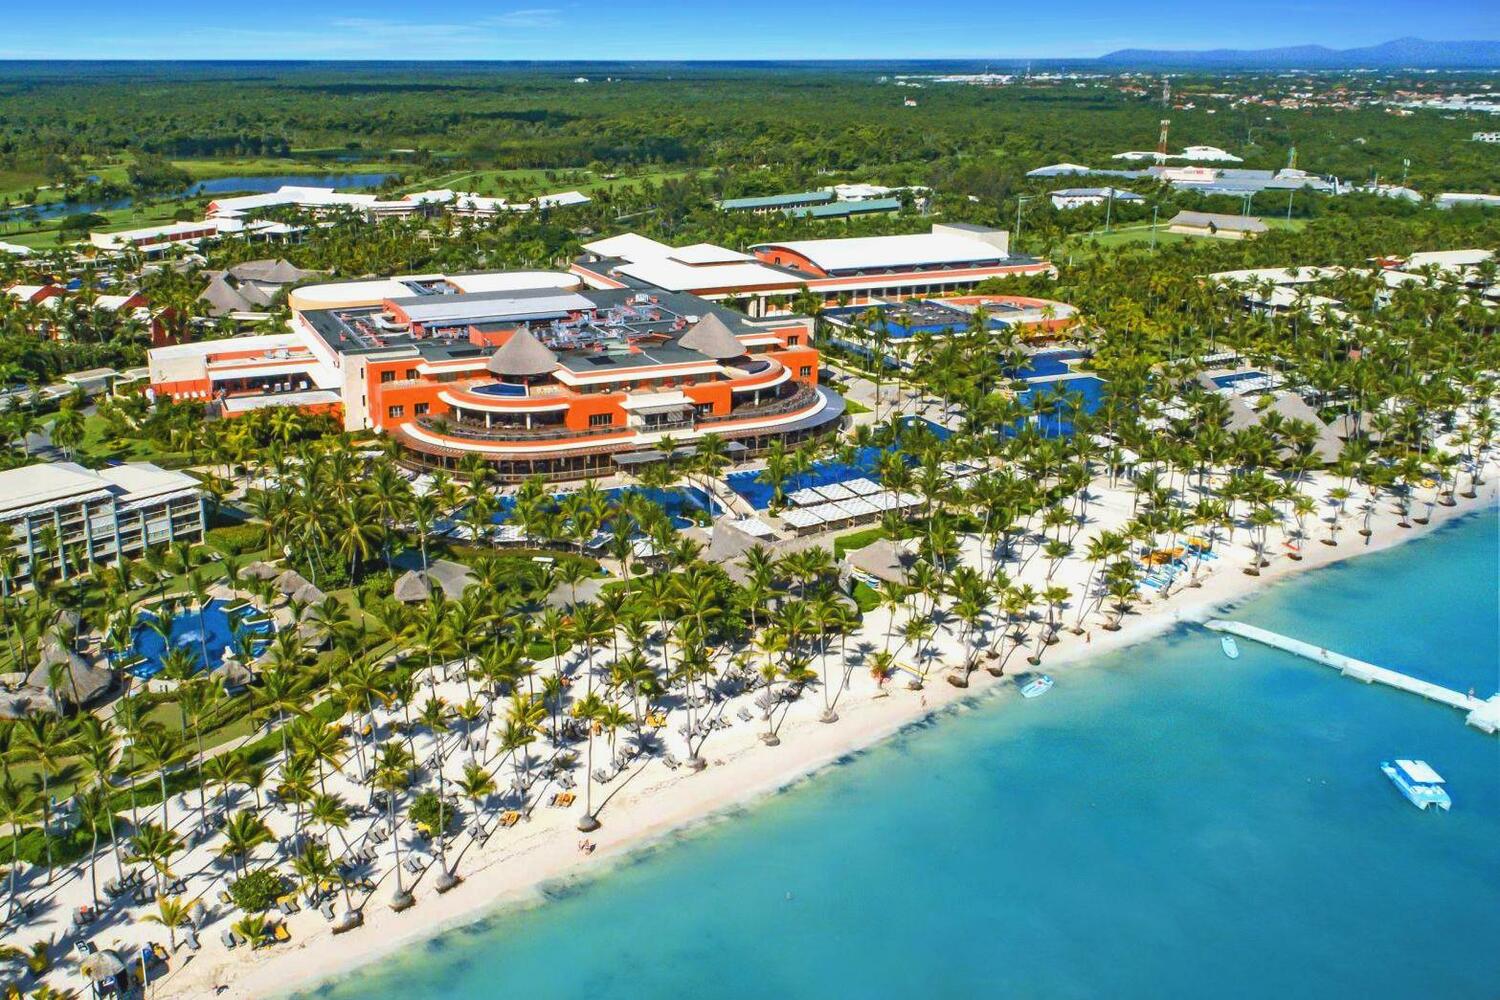 <span style="font-weight: bold;">Barcelo Bavaro Palace 5*&nbsp;&nbsp;</span><br>